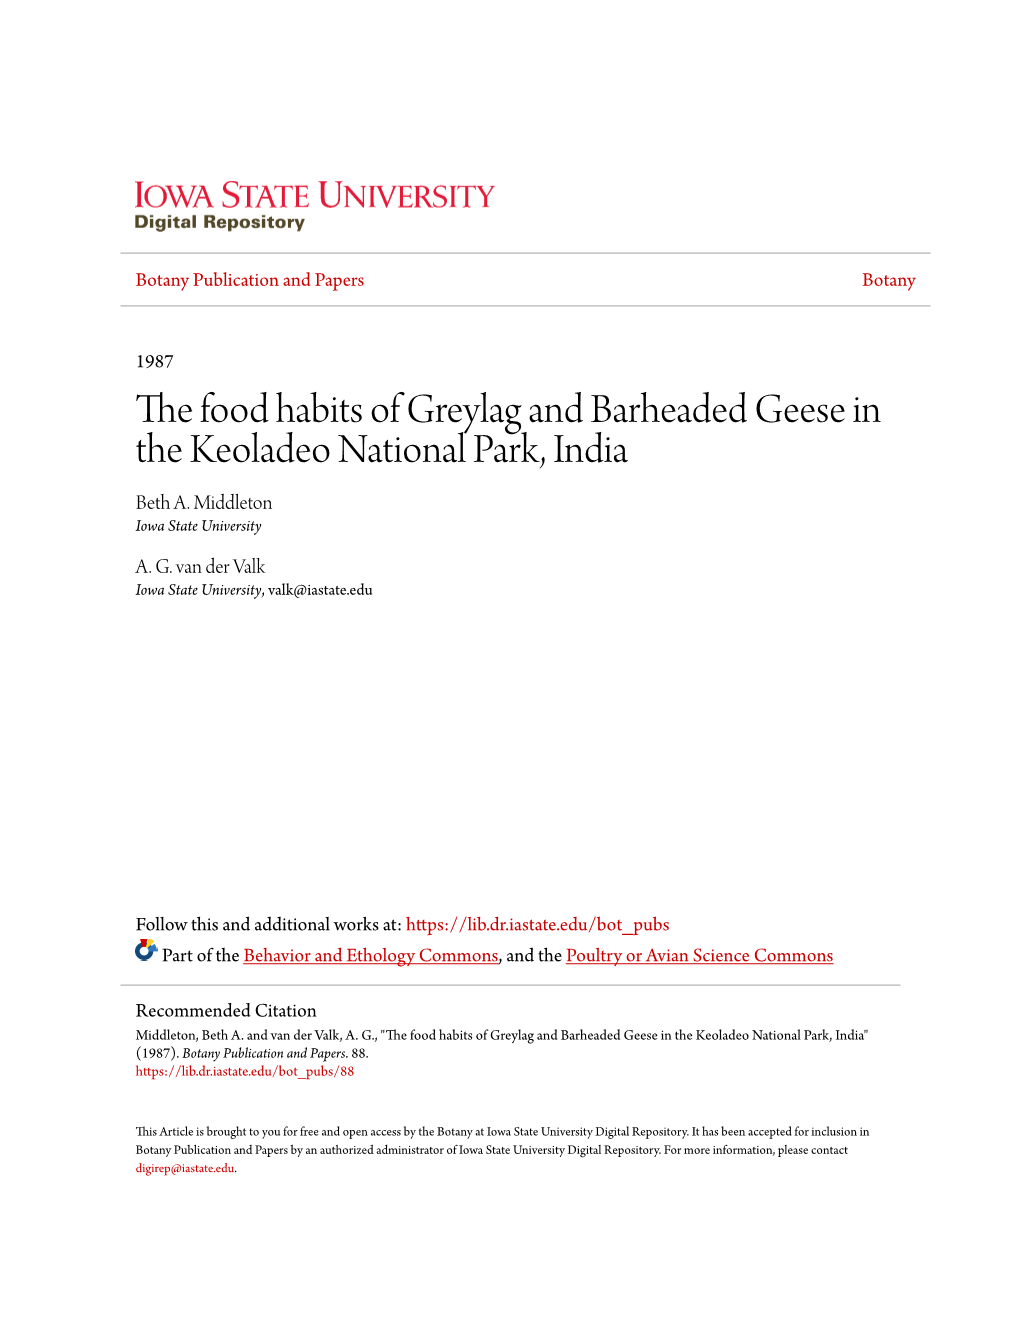 The Food Habits of Greylag and Barheaded Geese in the Keoladeo National Park, India Beth A